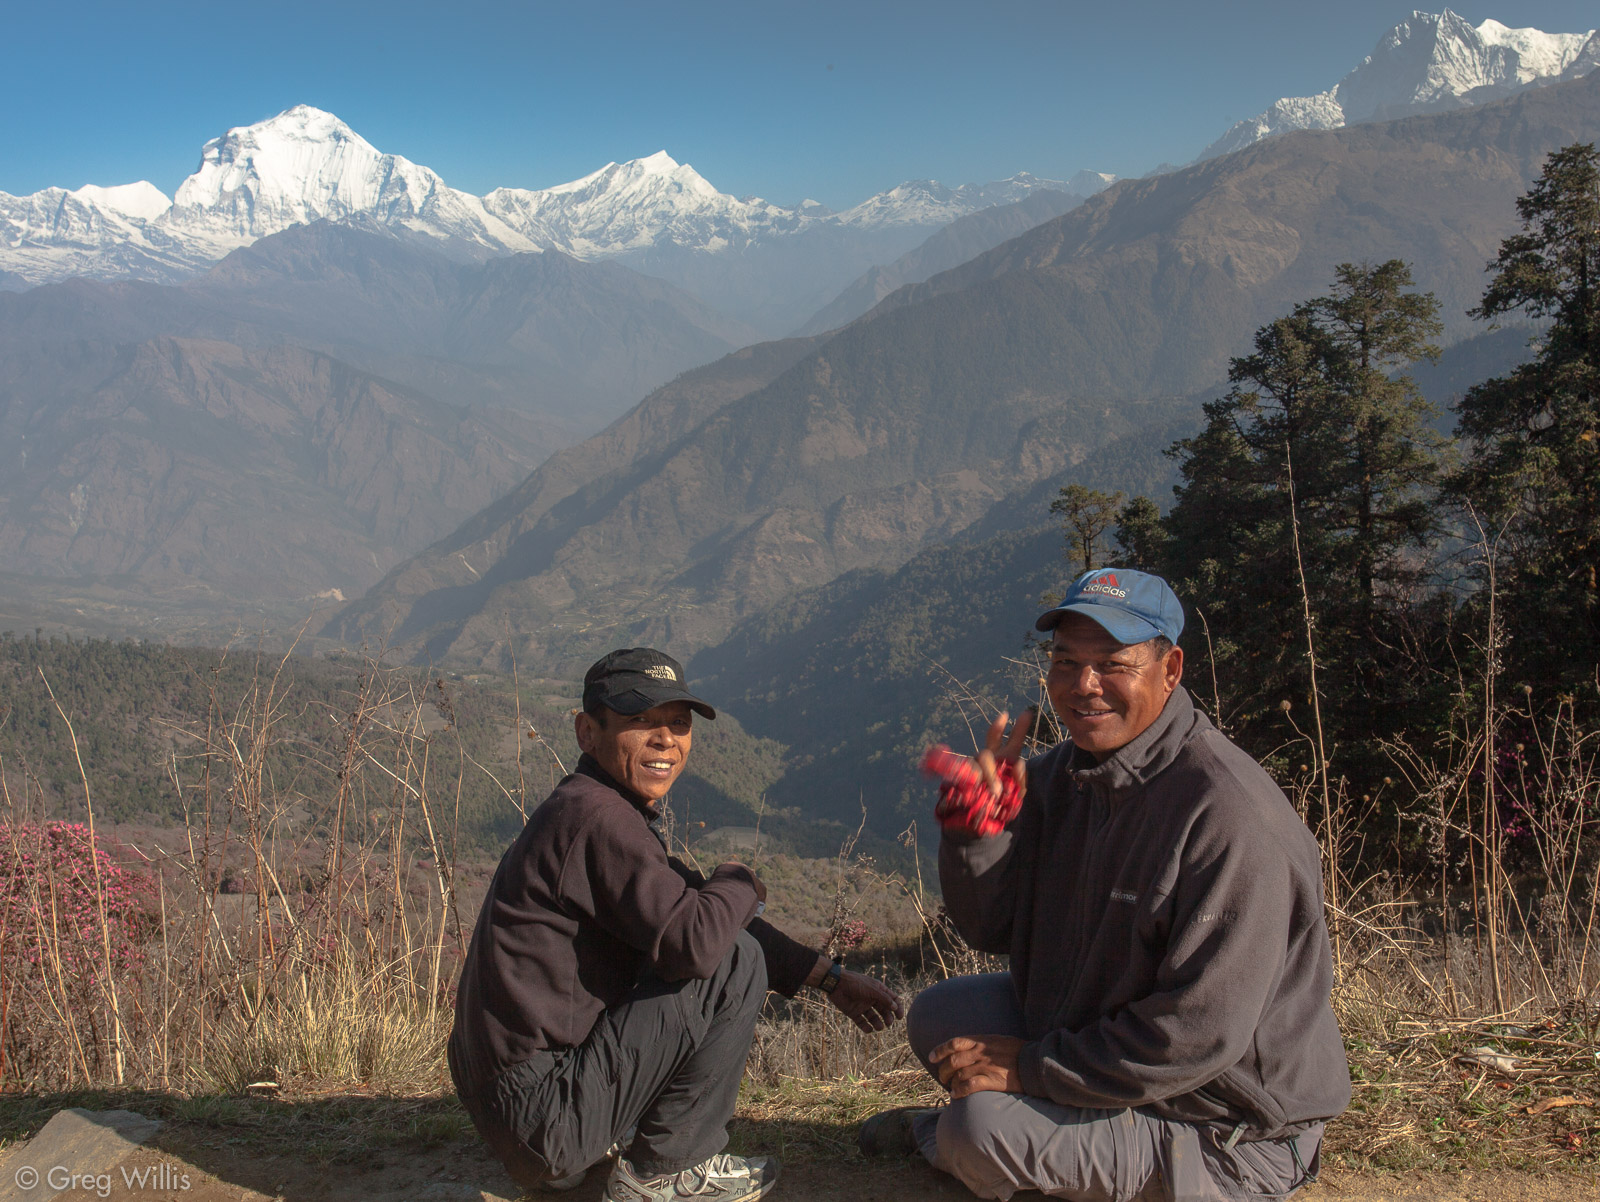 Our porter Ari and our guide Devendra Pun